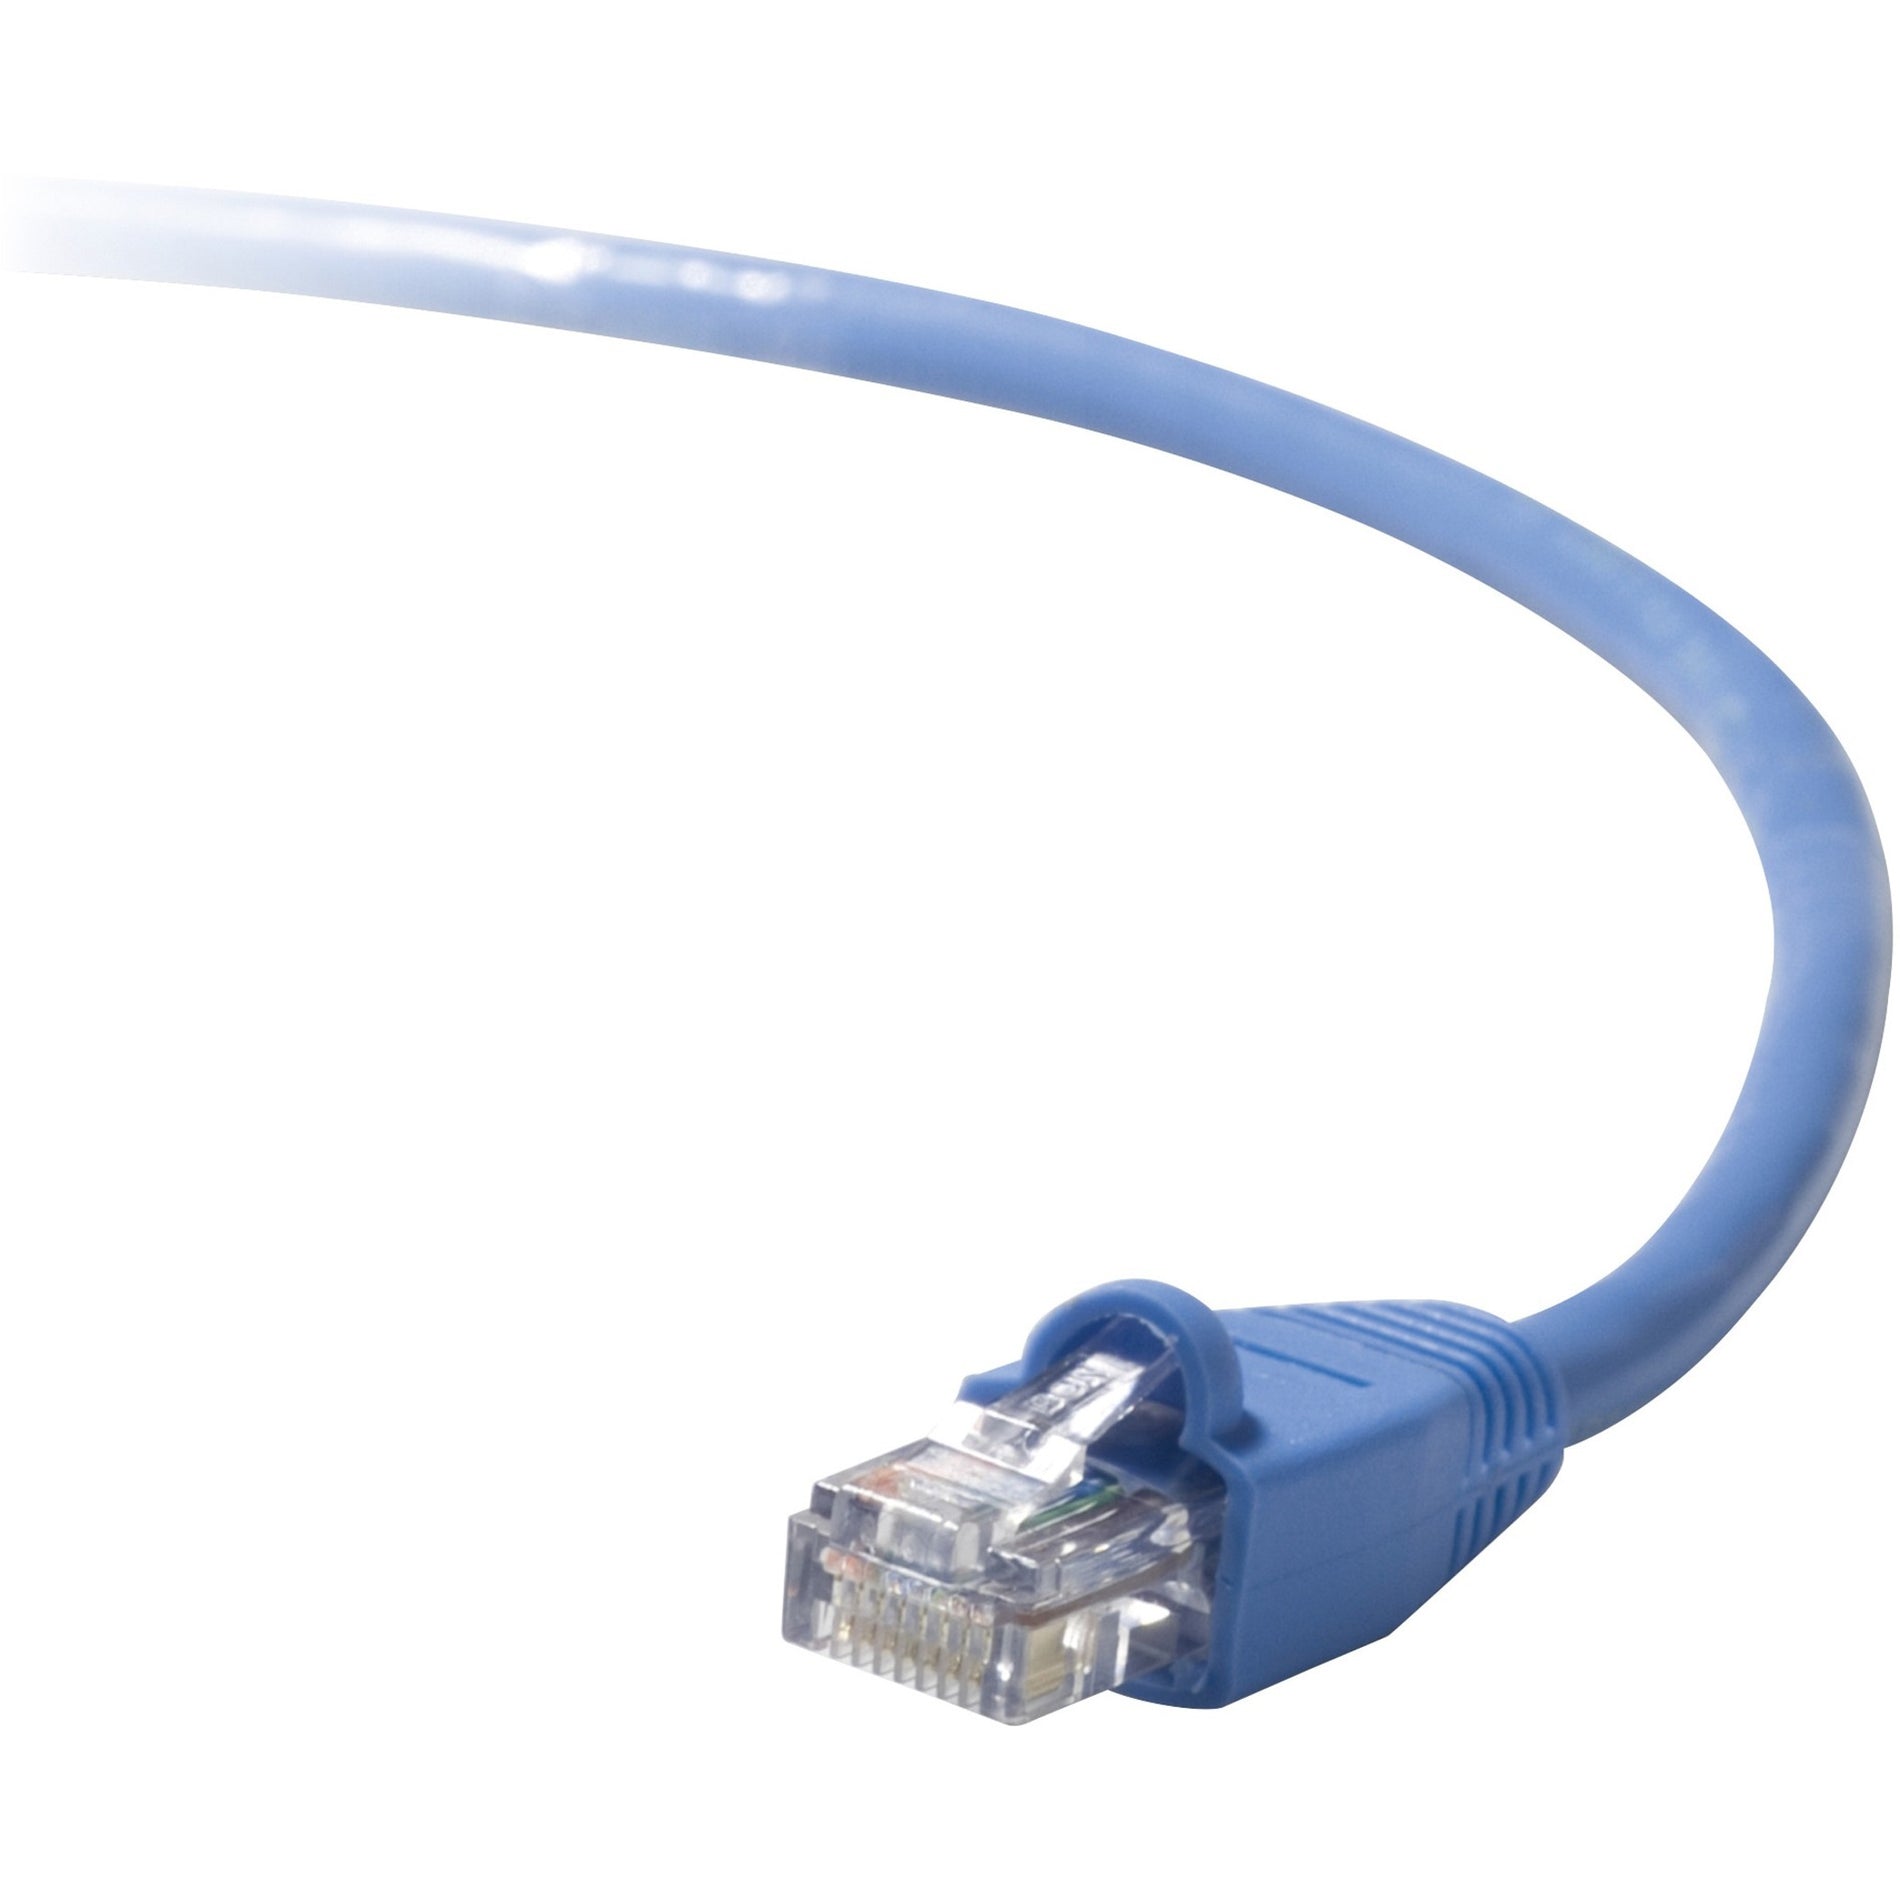 Belkin A3L791-03-BLU-S RJ45 CAT5e Snagless Patch Cable, 3 ft, Blue, Exceeds Category 5e Performance